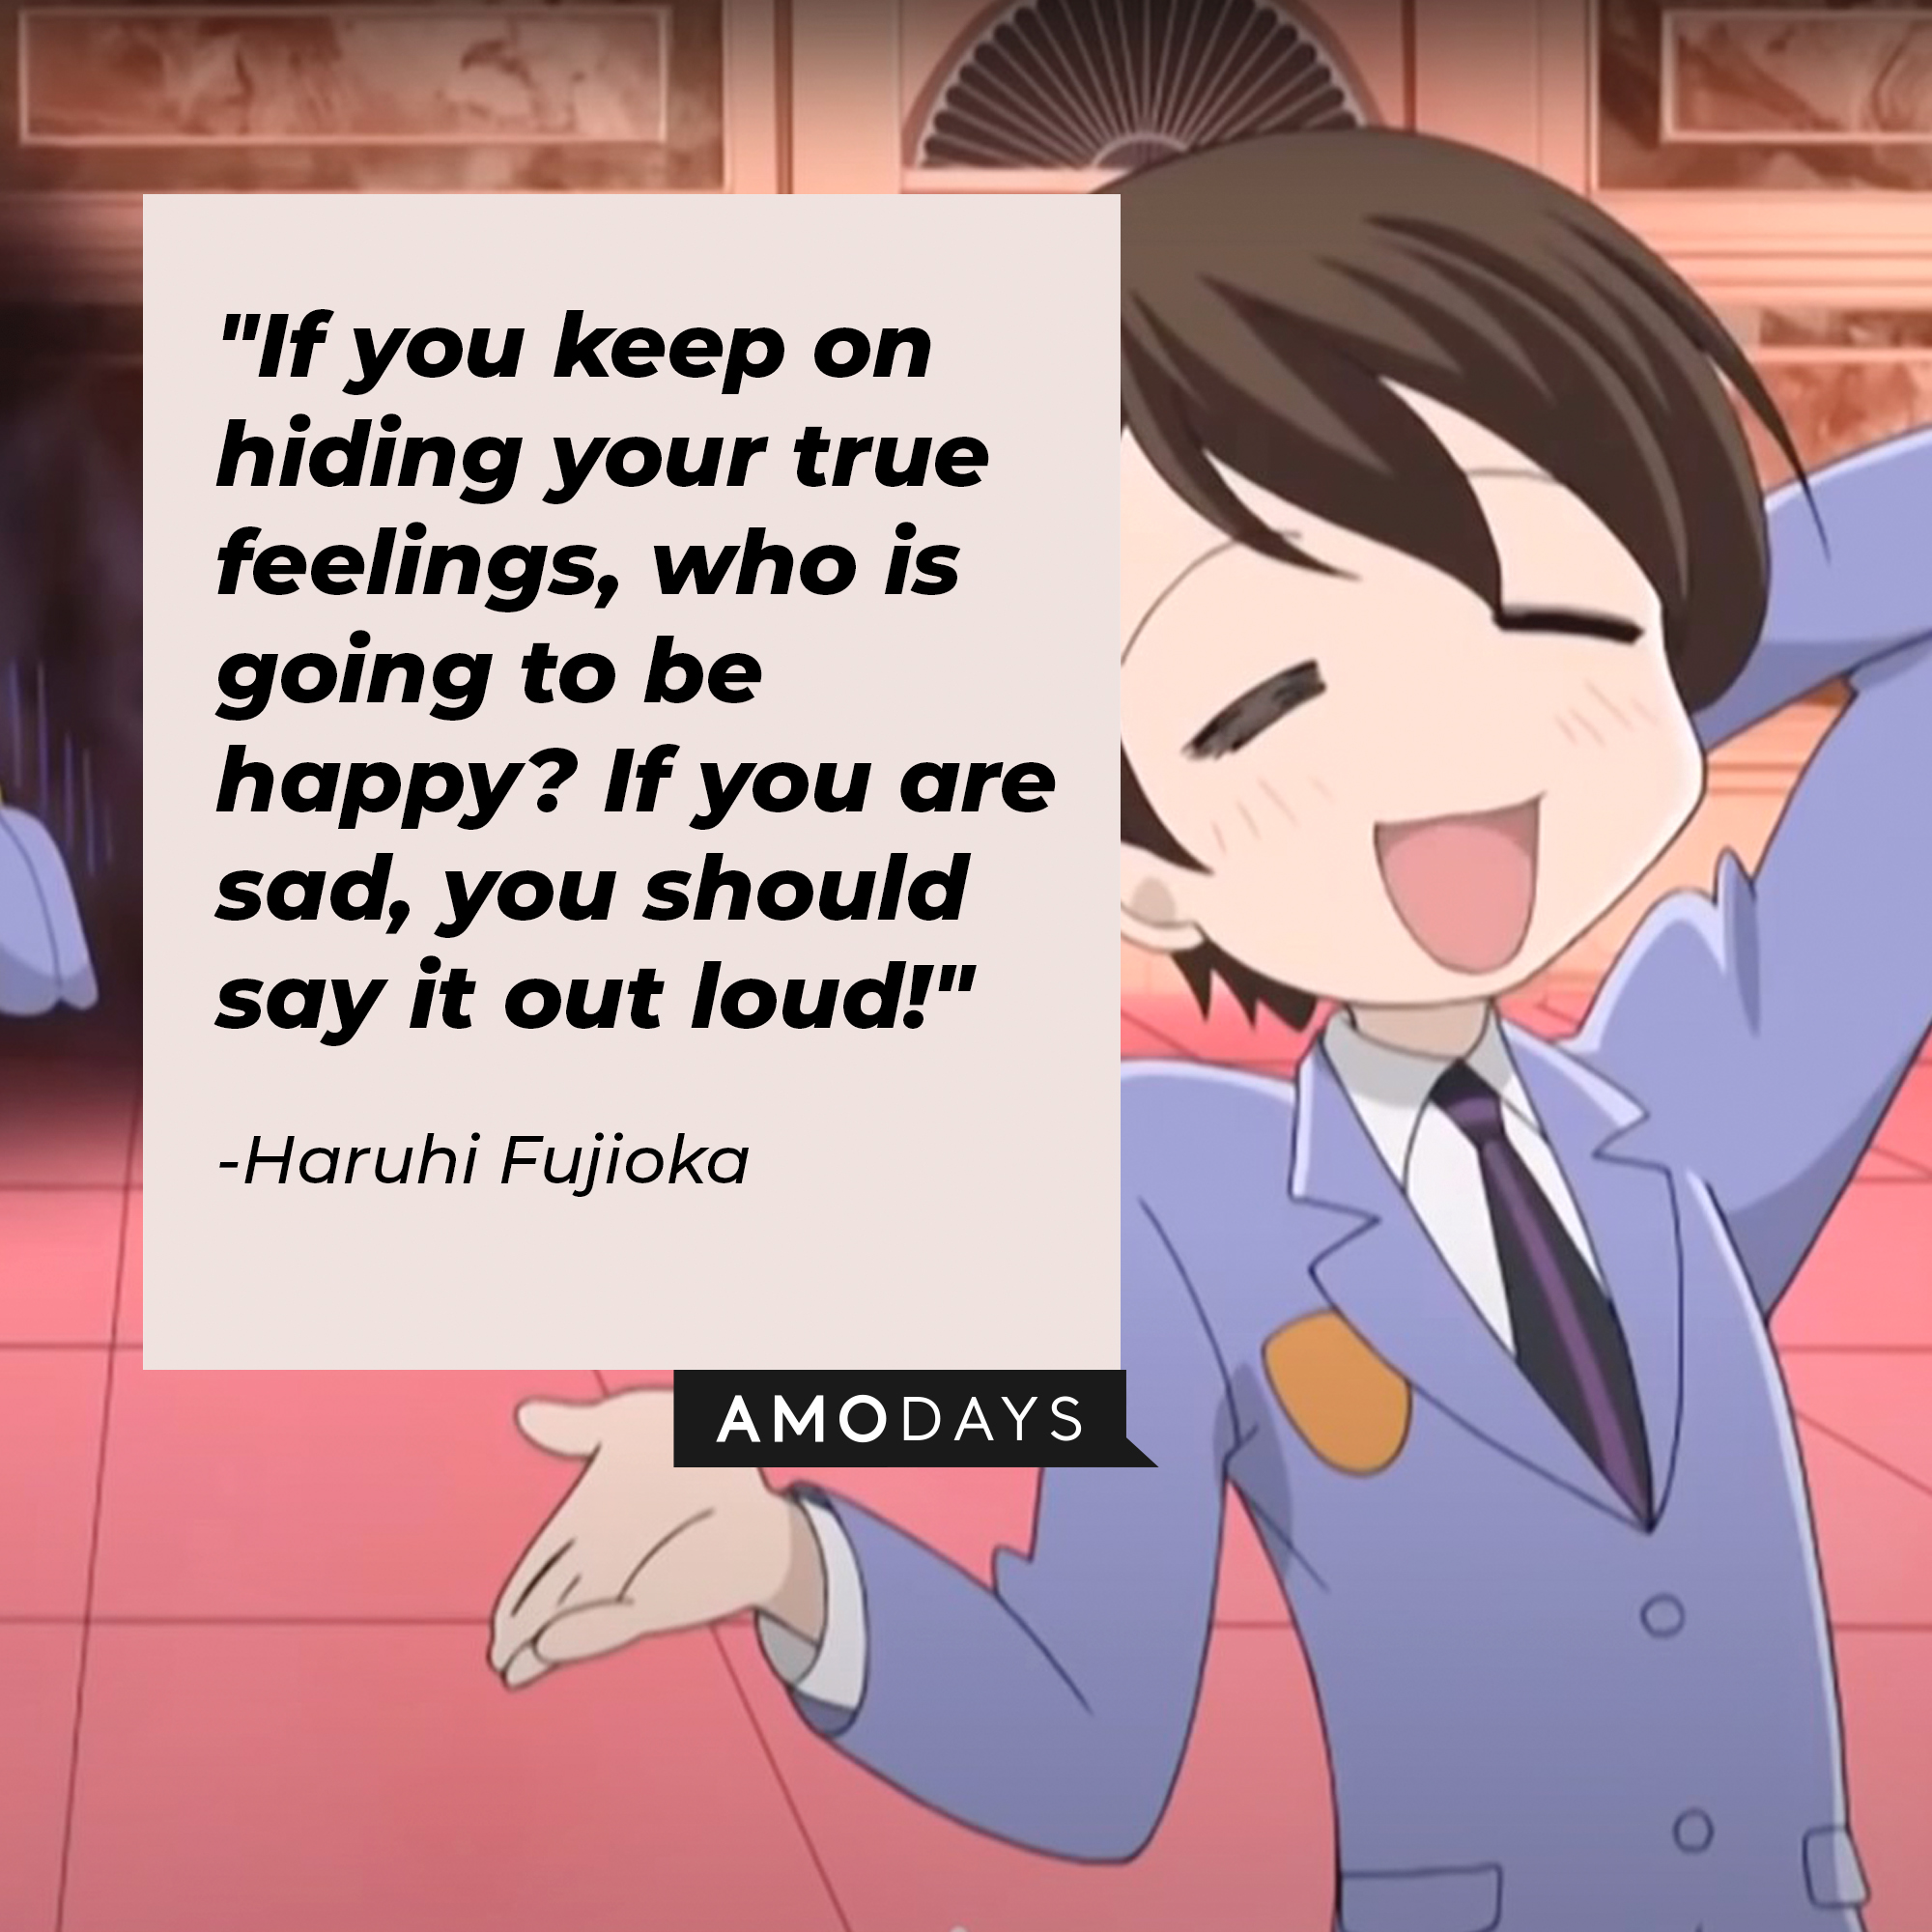 Haruhi Fujioka's quote: "If you keep on hiding your true feelings, who is going to be happy? If you are sad, you should say it out loud!" | Source: Facebook.com/theouranhostclub